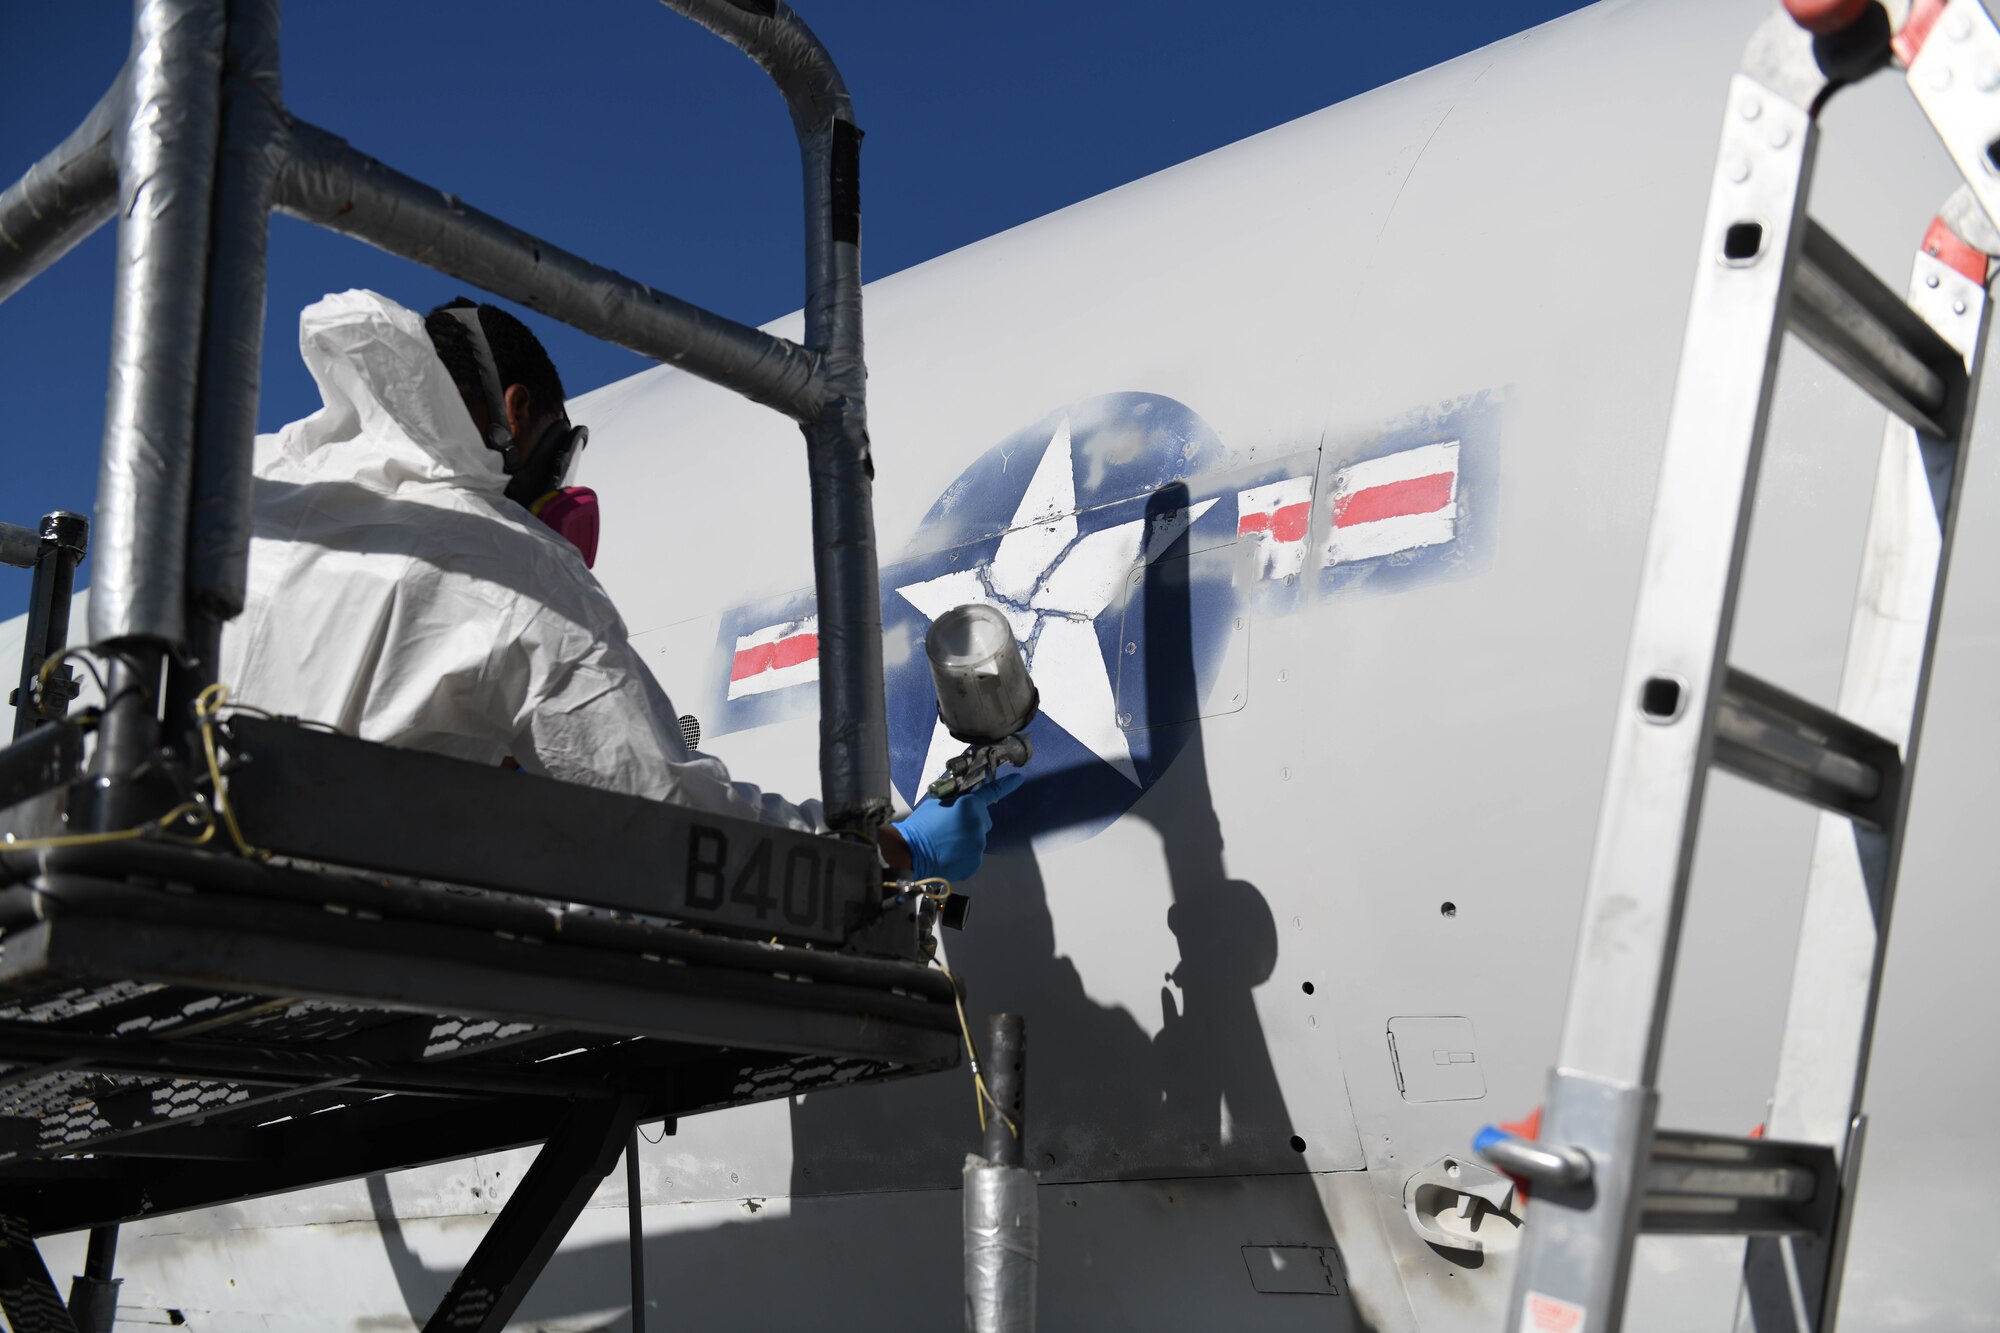 U.S. Air Force Airman 1st Class Tracy Bethea, 509th Maintenance Squadron low-observable maintenance technician, paints around the Air Force Roundel at Whiteman Air Force Base, Missouri, Oct. 13, 2020. The body of the Boeing B-47 Stratojet static aircraft had to be sanded down during restoration before any painting could begin. (U.S. Air Force photograph by Airman 1st Class Devan Halstead)